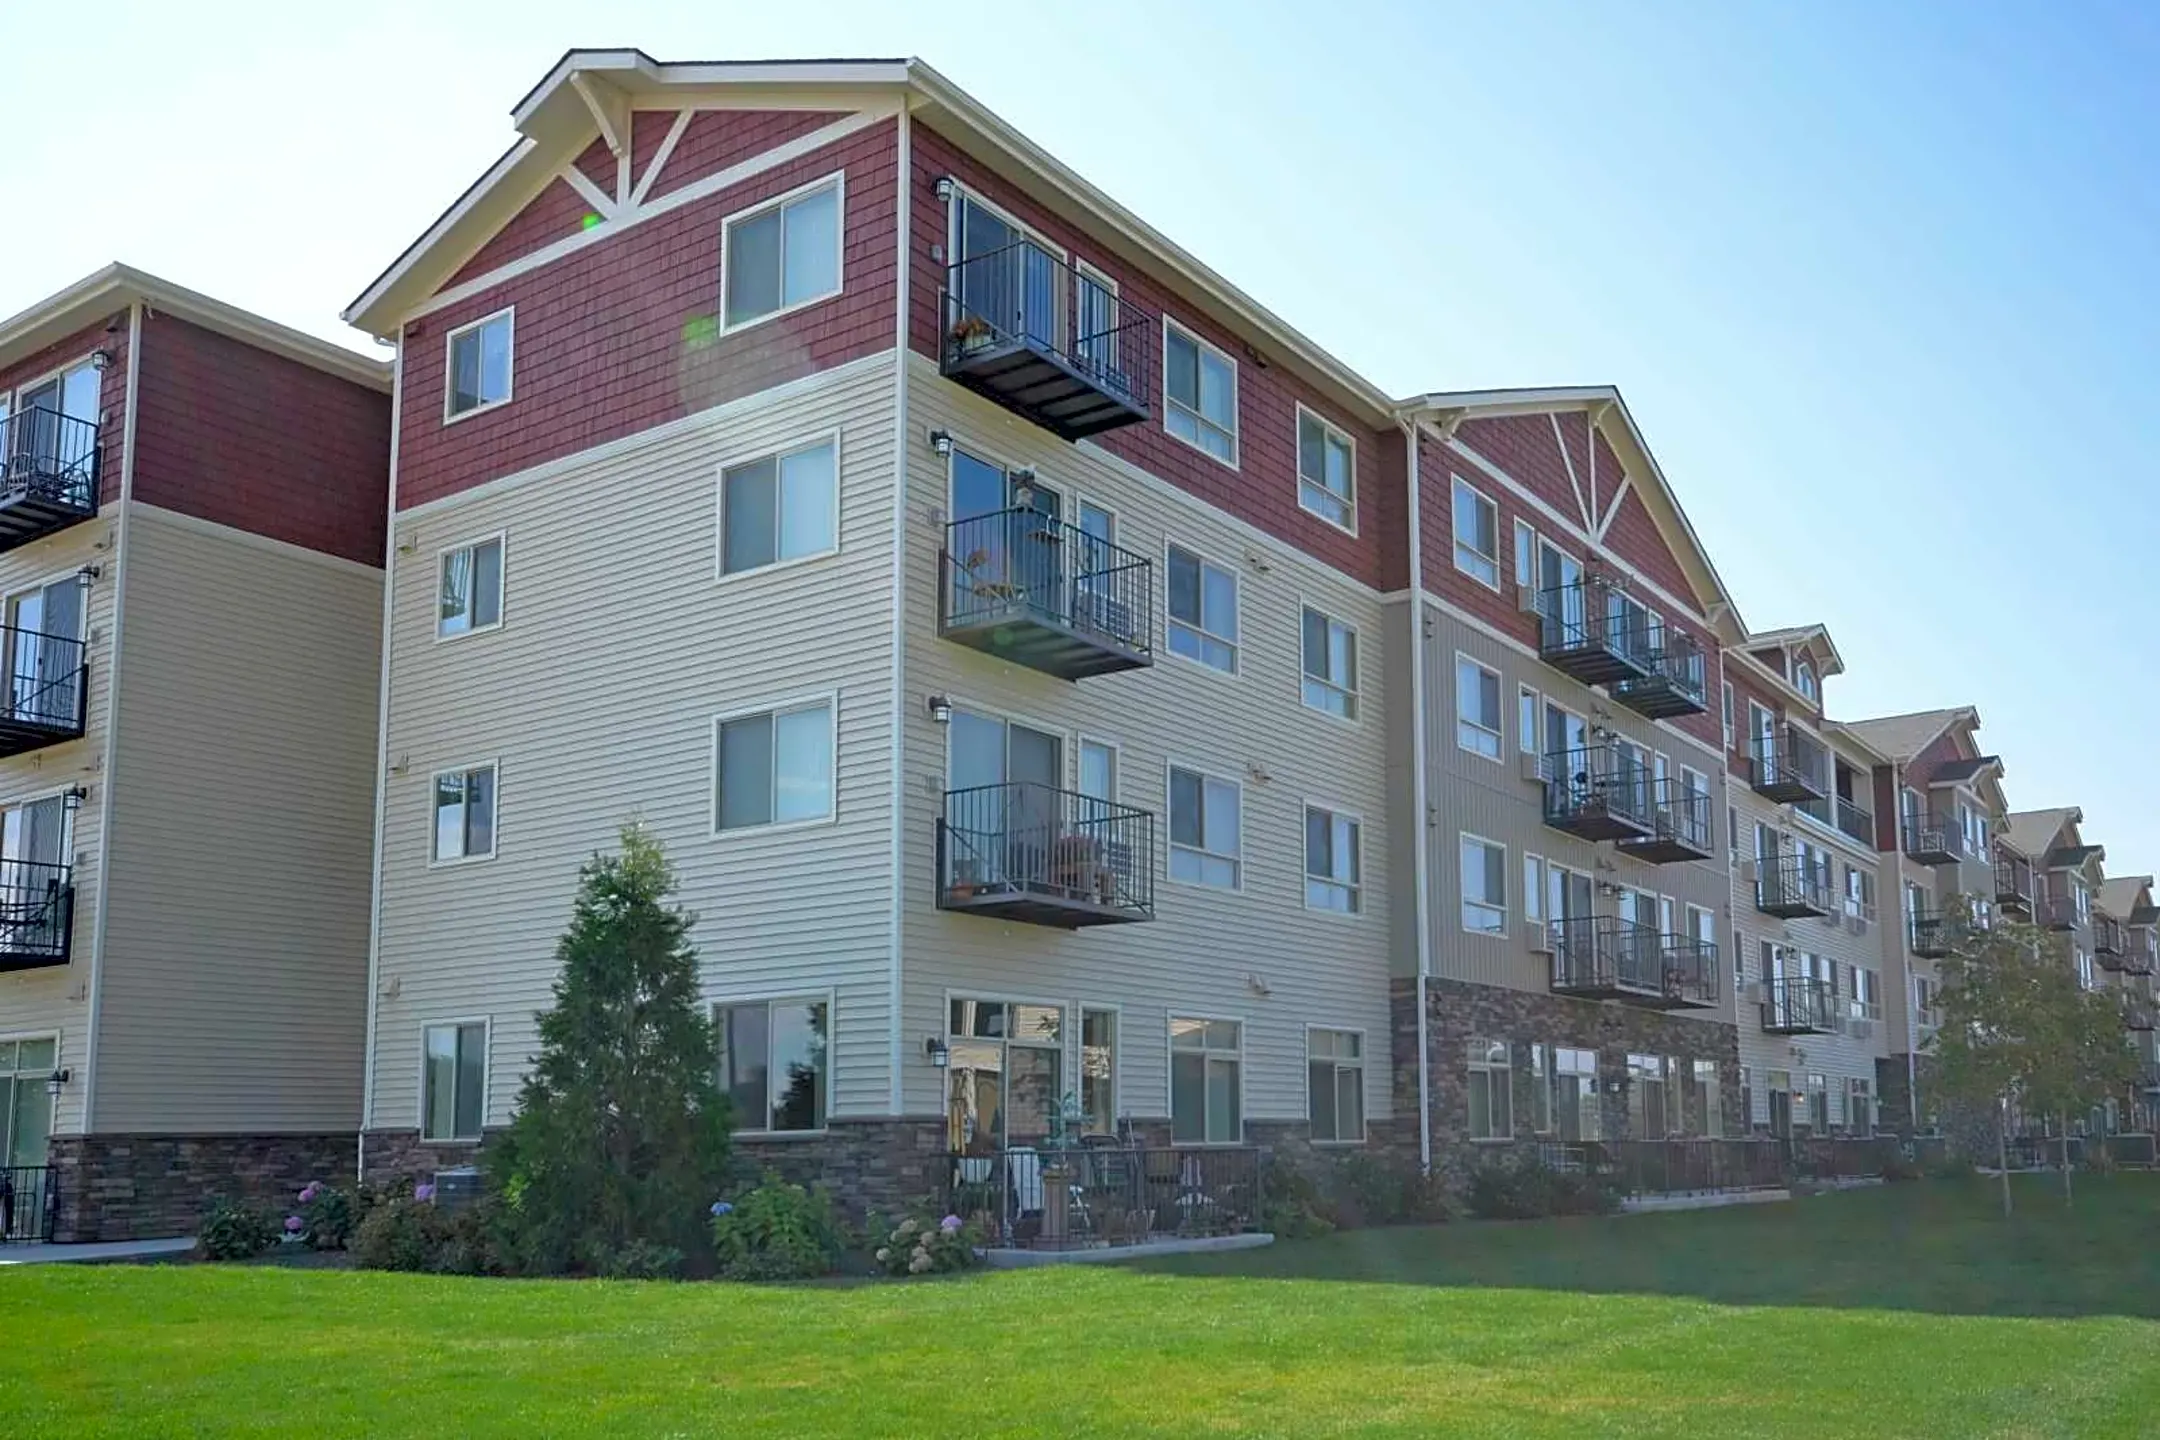 Building - Affinity at Boise 55+ Living - Boise, ID